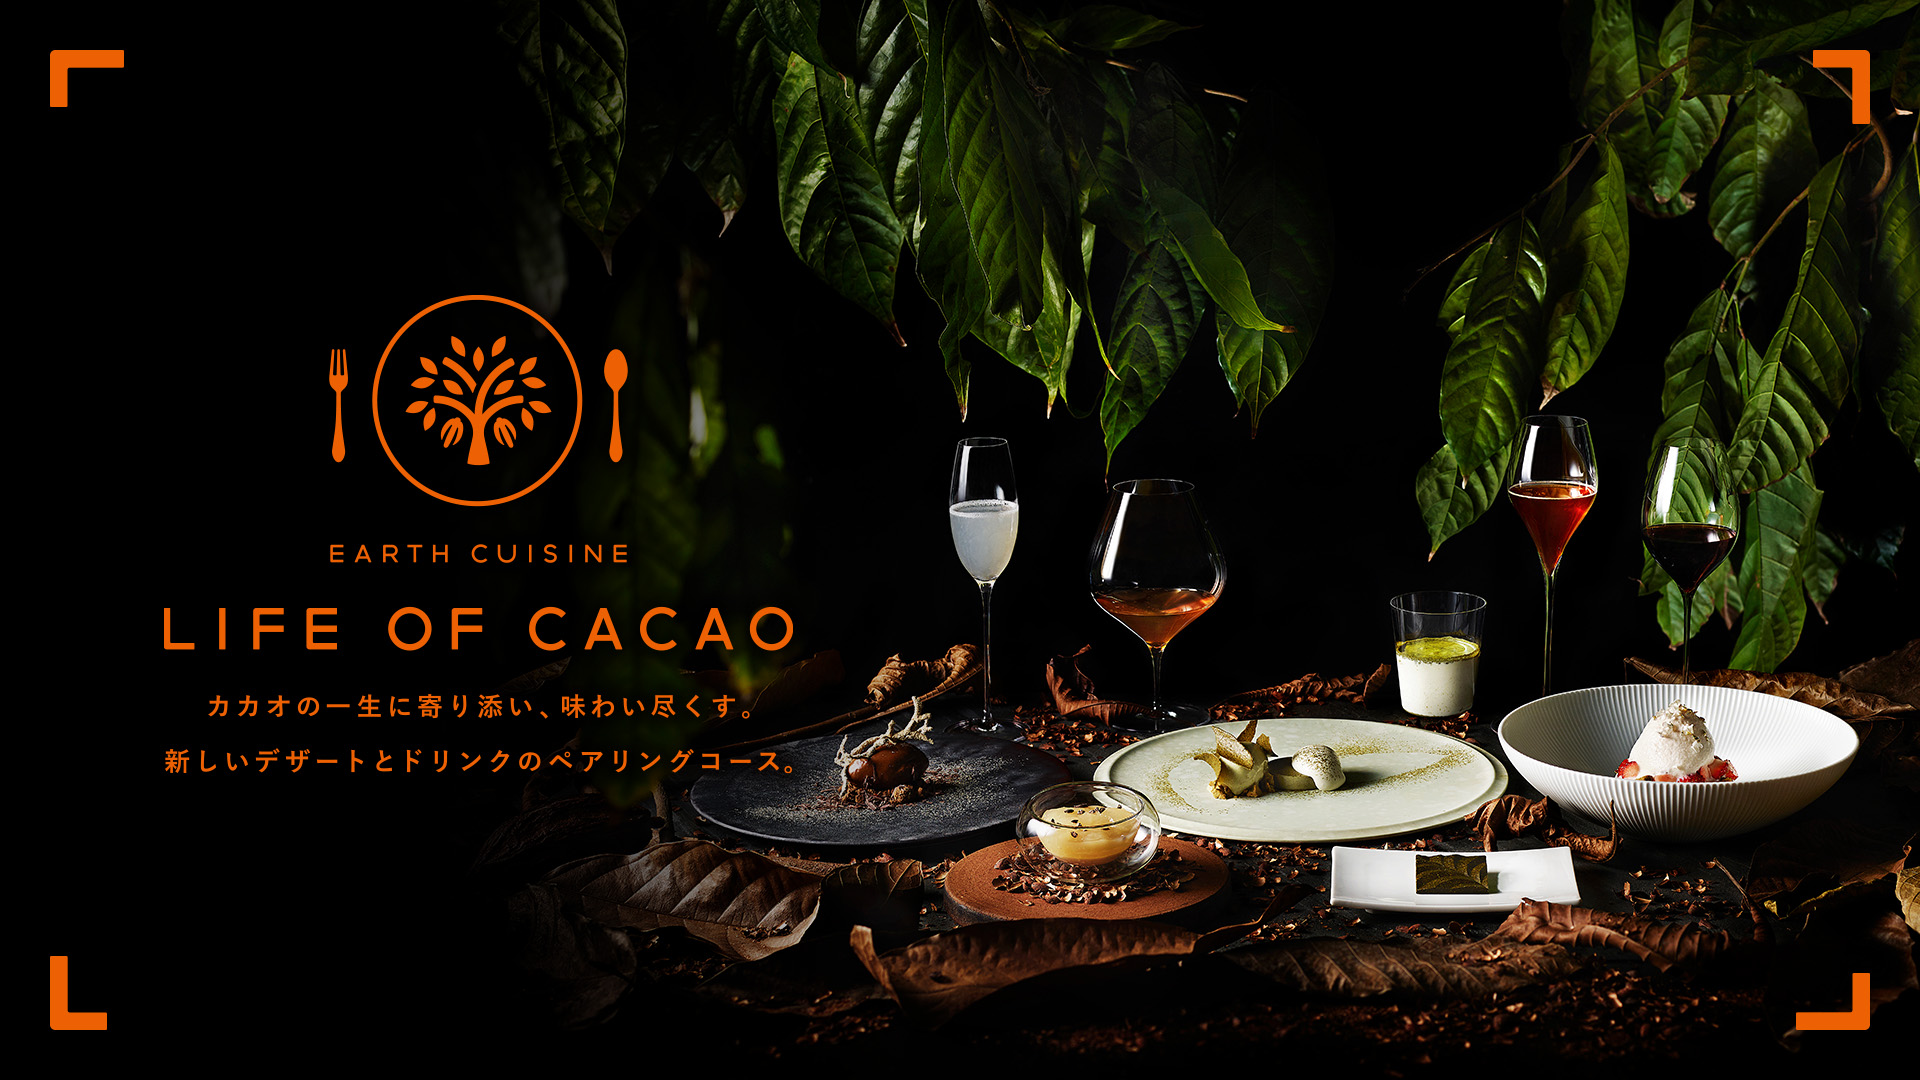 LIFE OF CACAO